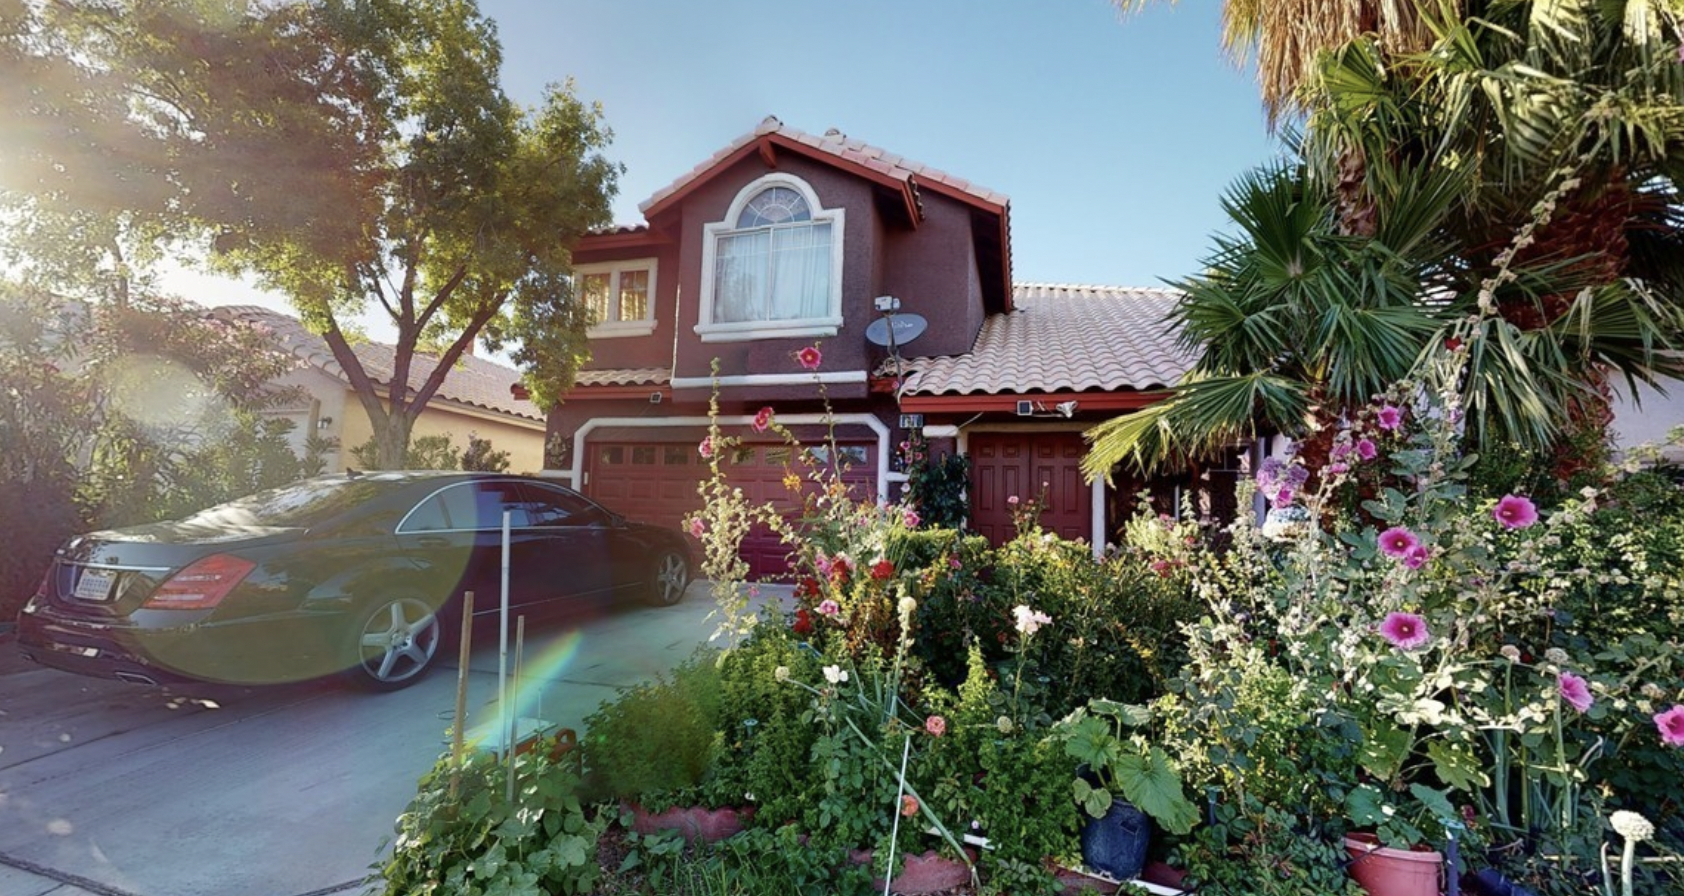 A burgundy-colored home with a lush front garden including deciduous and palm trees, roses, other flowers, and vegetables